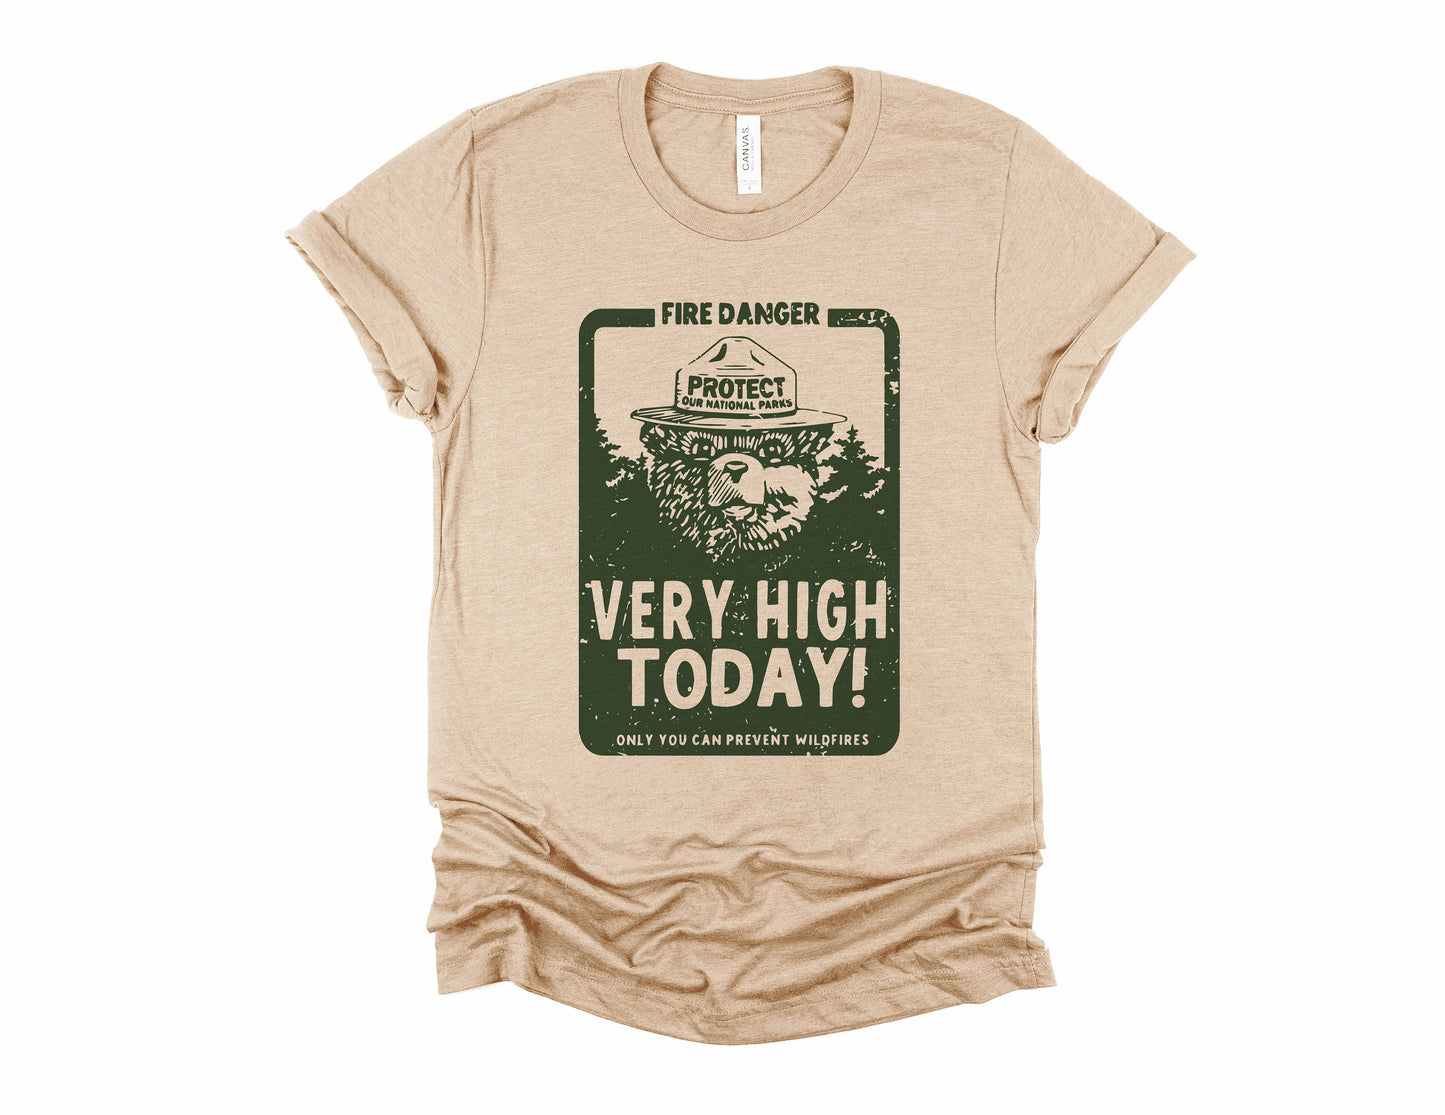 Fire Danger Very High Bear With Hat National Park USA Vintage Retro Ultra Soft Unisex Soft Tee T-shirt for Women or Men